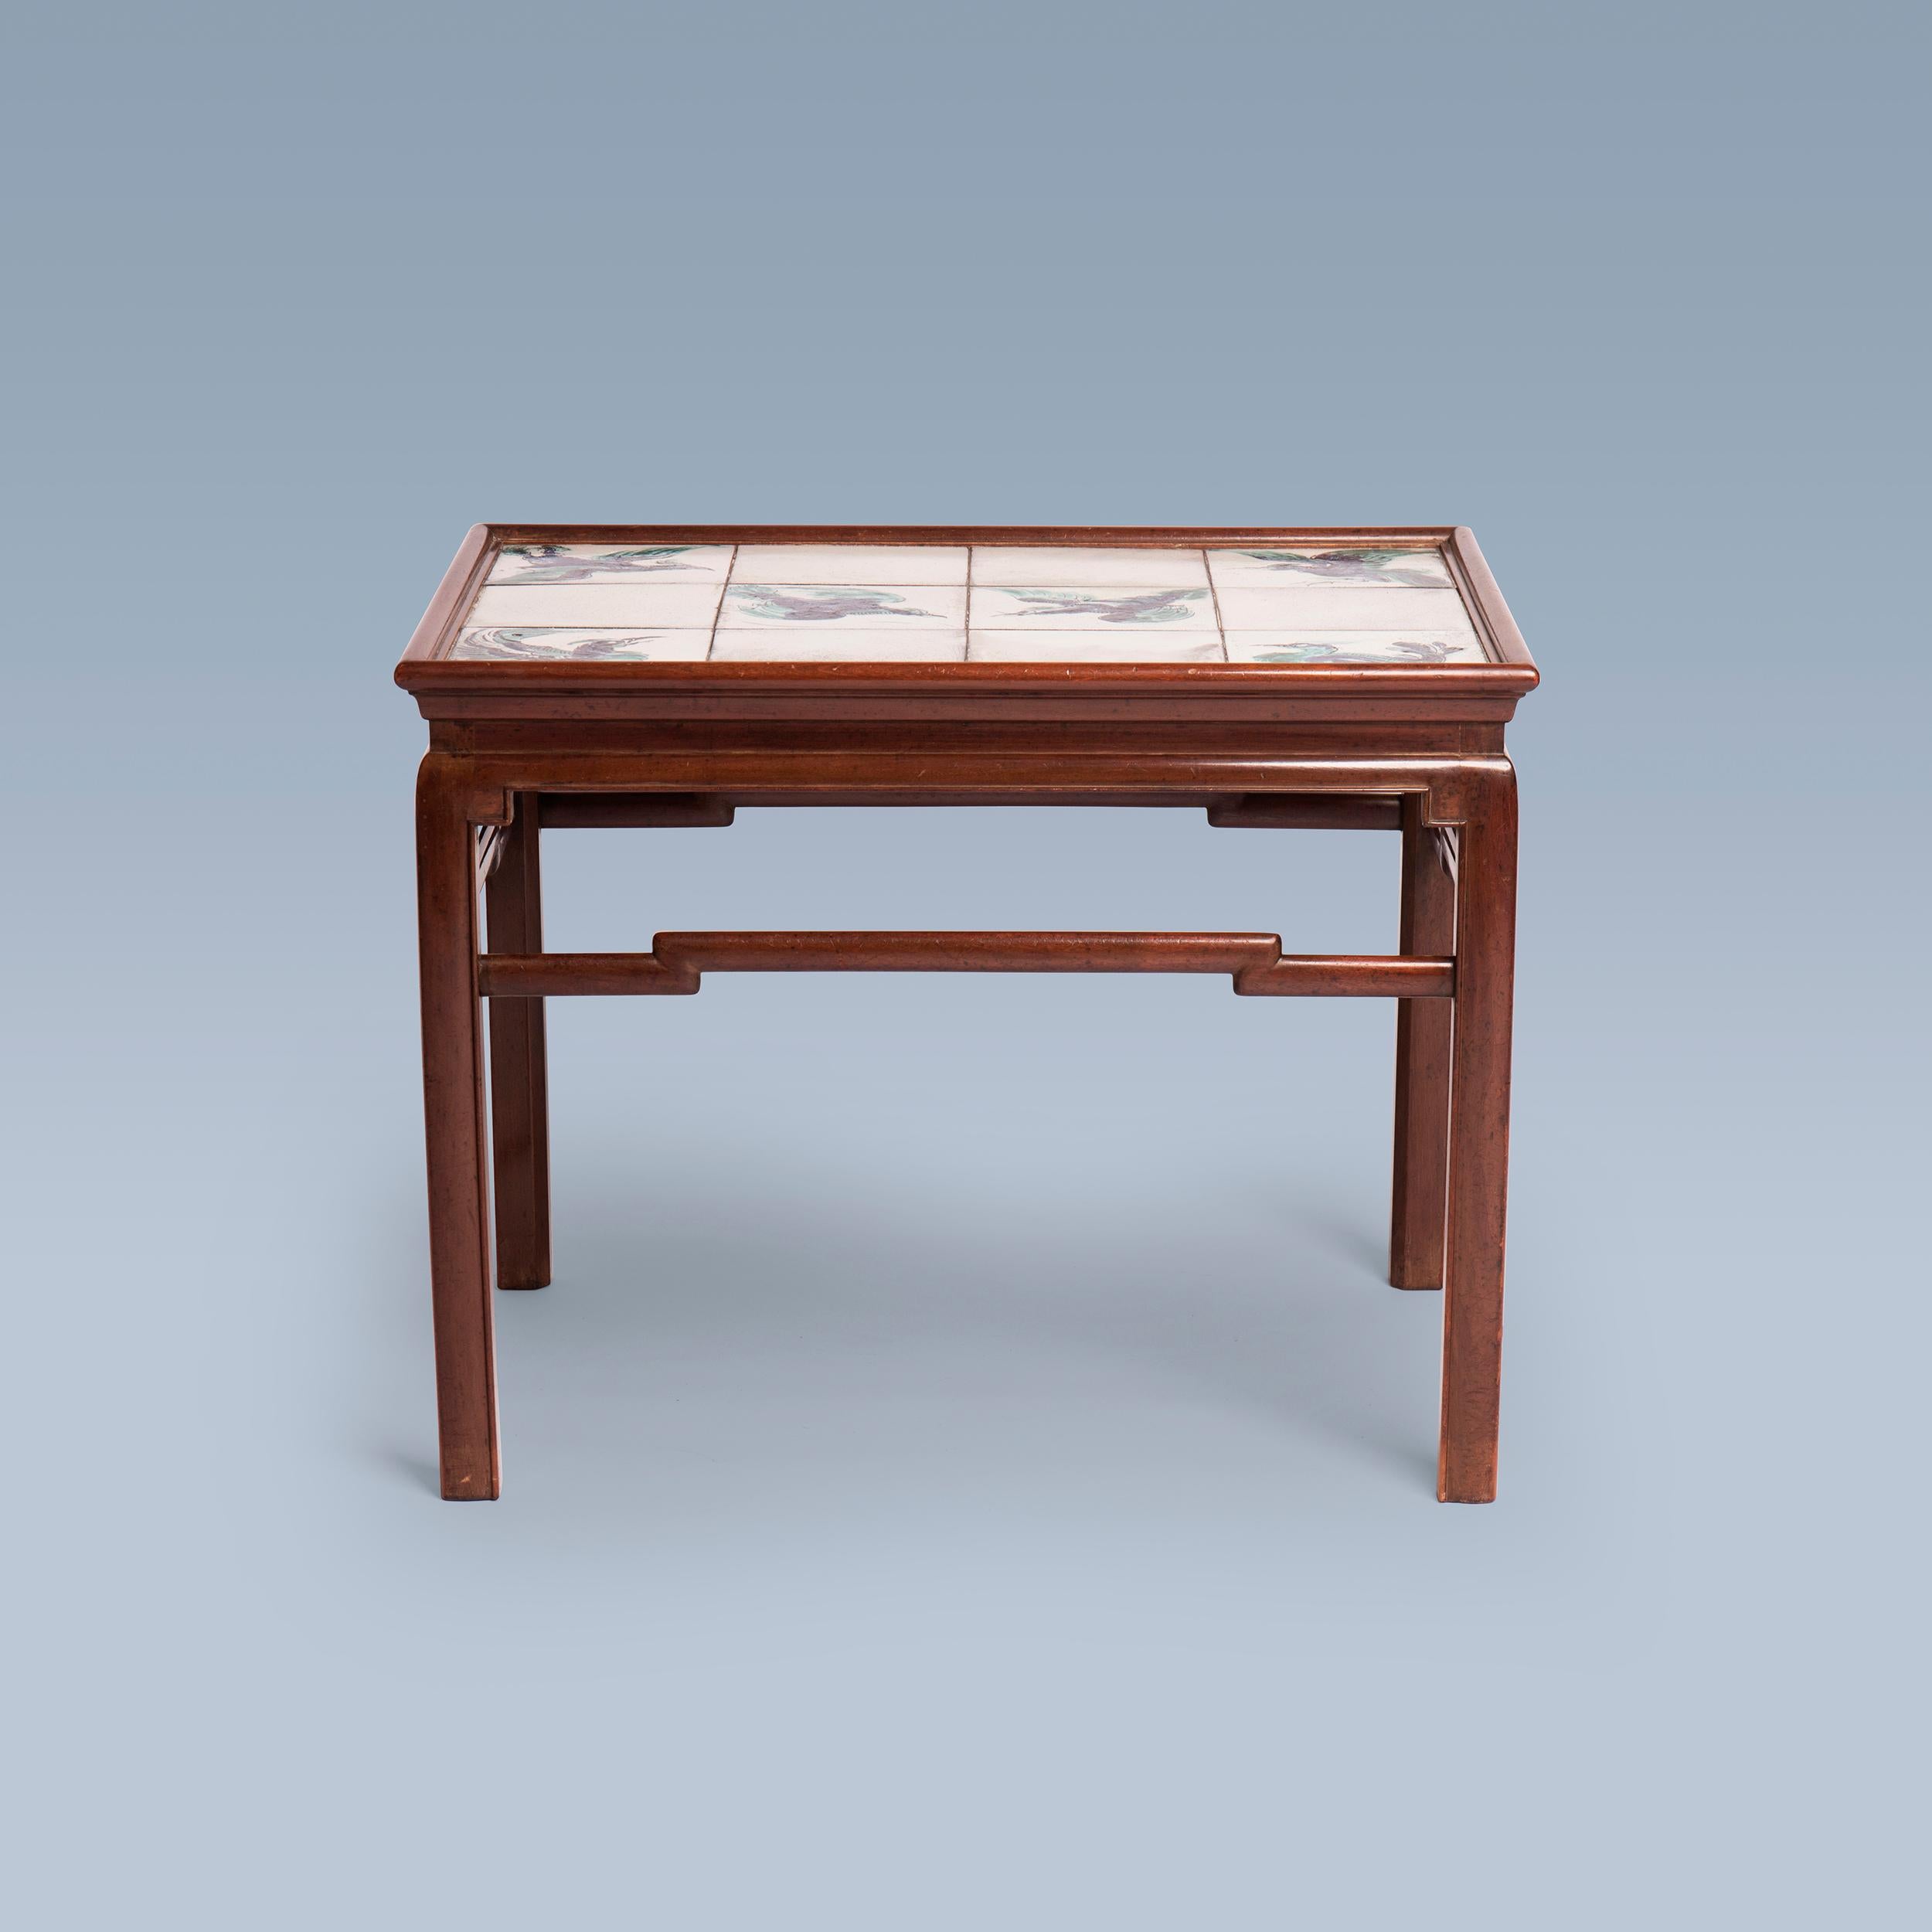 This Chinese inspired mahogany coffee table was executed by cabinetmaker Frits Henningsen (1889-1965) in the 1930s.
The table top is decorated with unique tiles depicting Chinese Fenghuang birds also called the August rooster – a positive symbol of